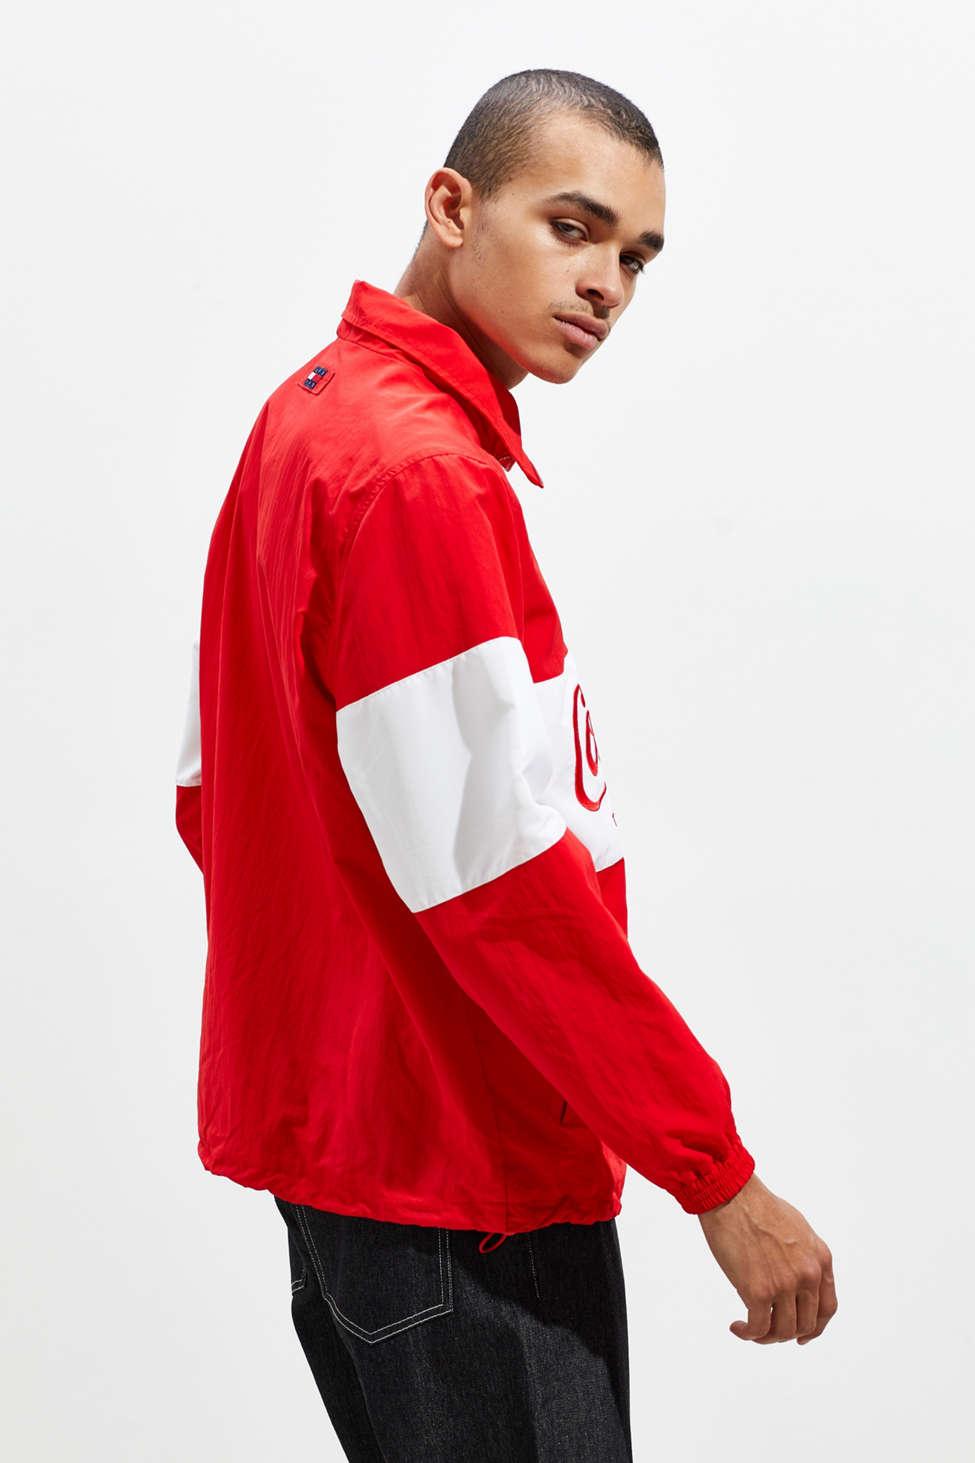 Tommy Hilfiger X Coca-cola Jacket in Red for Men | Lyst